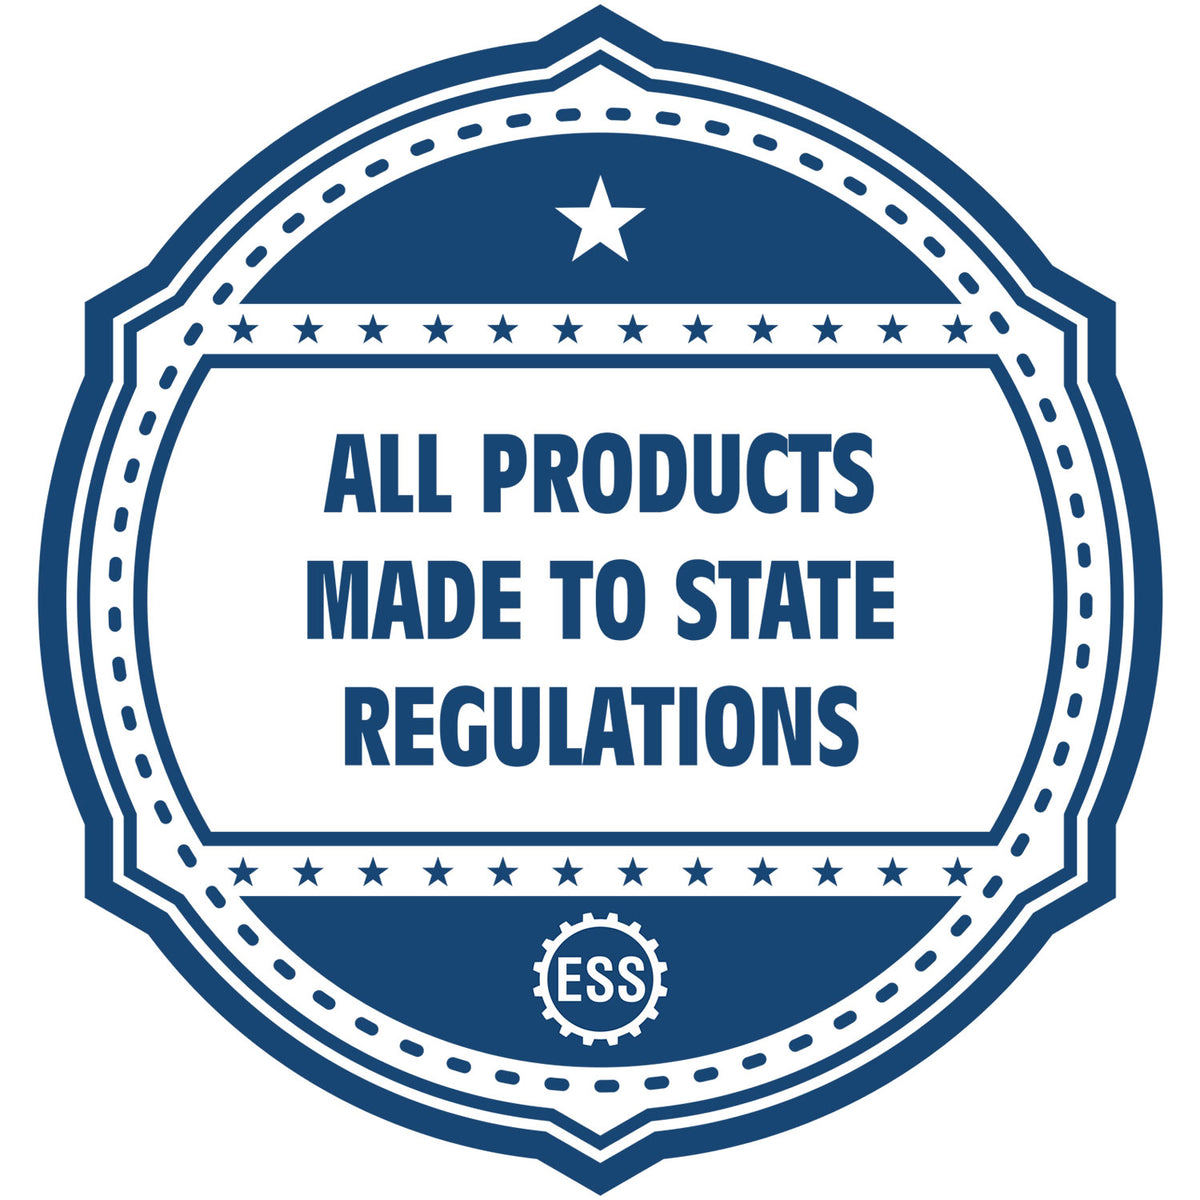 A blue icon or badge for the Hybrid Kansas Landscape Architect Seal showing that this product is made in compliance with state regulations.